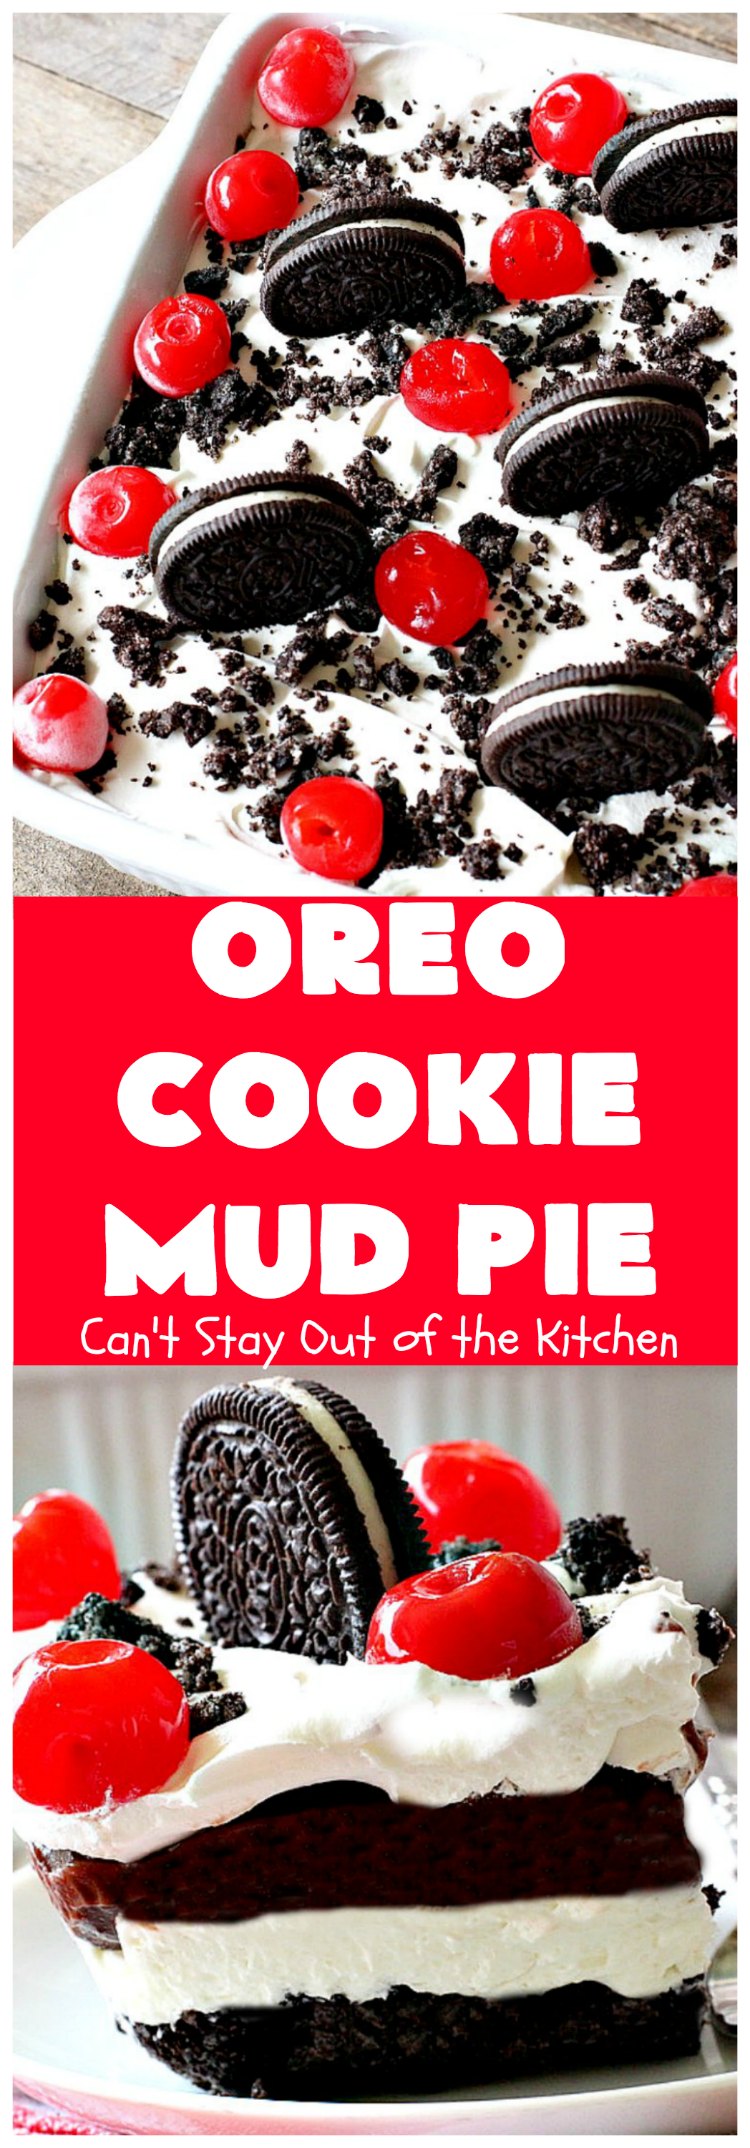 Oreo Cookie Mud Pie | Can't Stay Out of the Kitchen